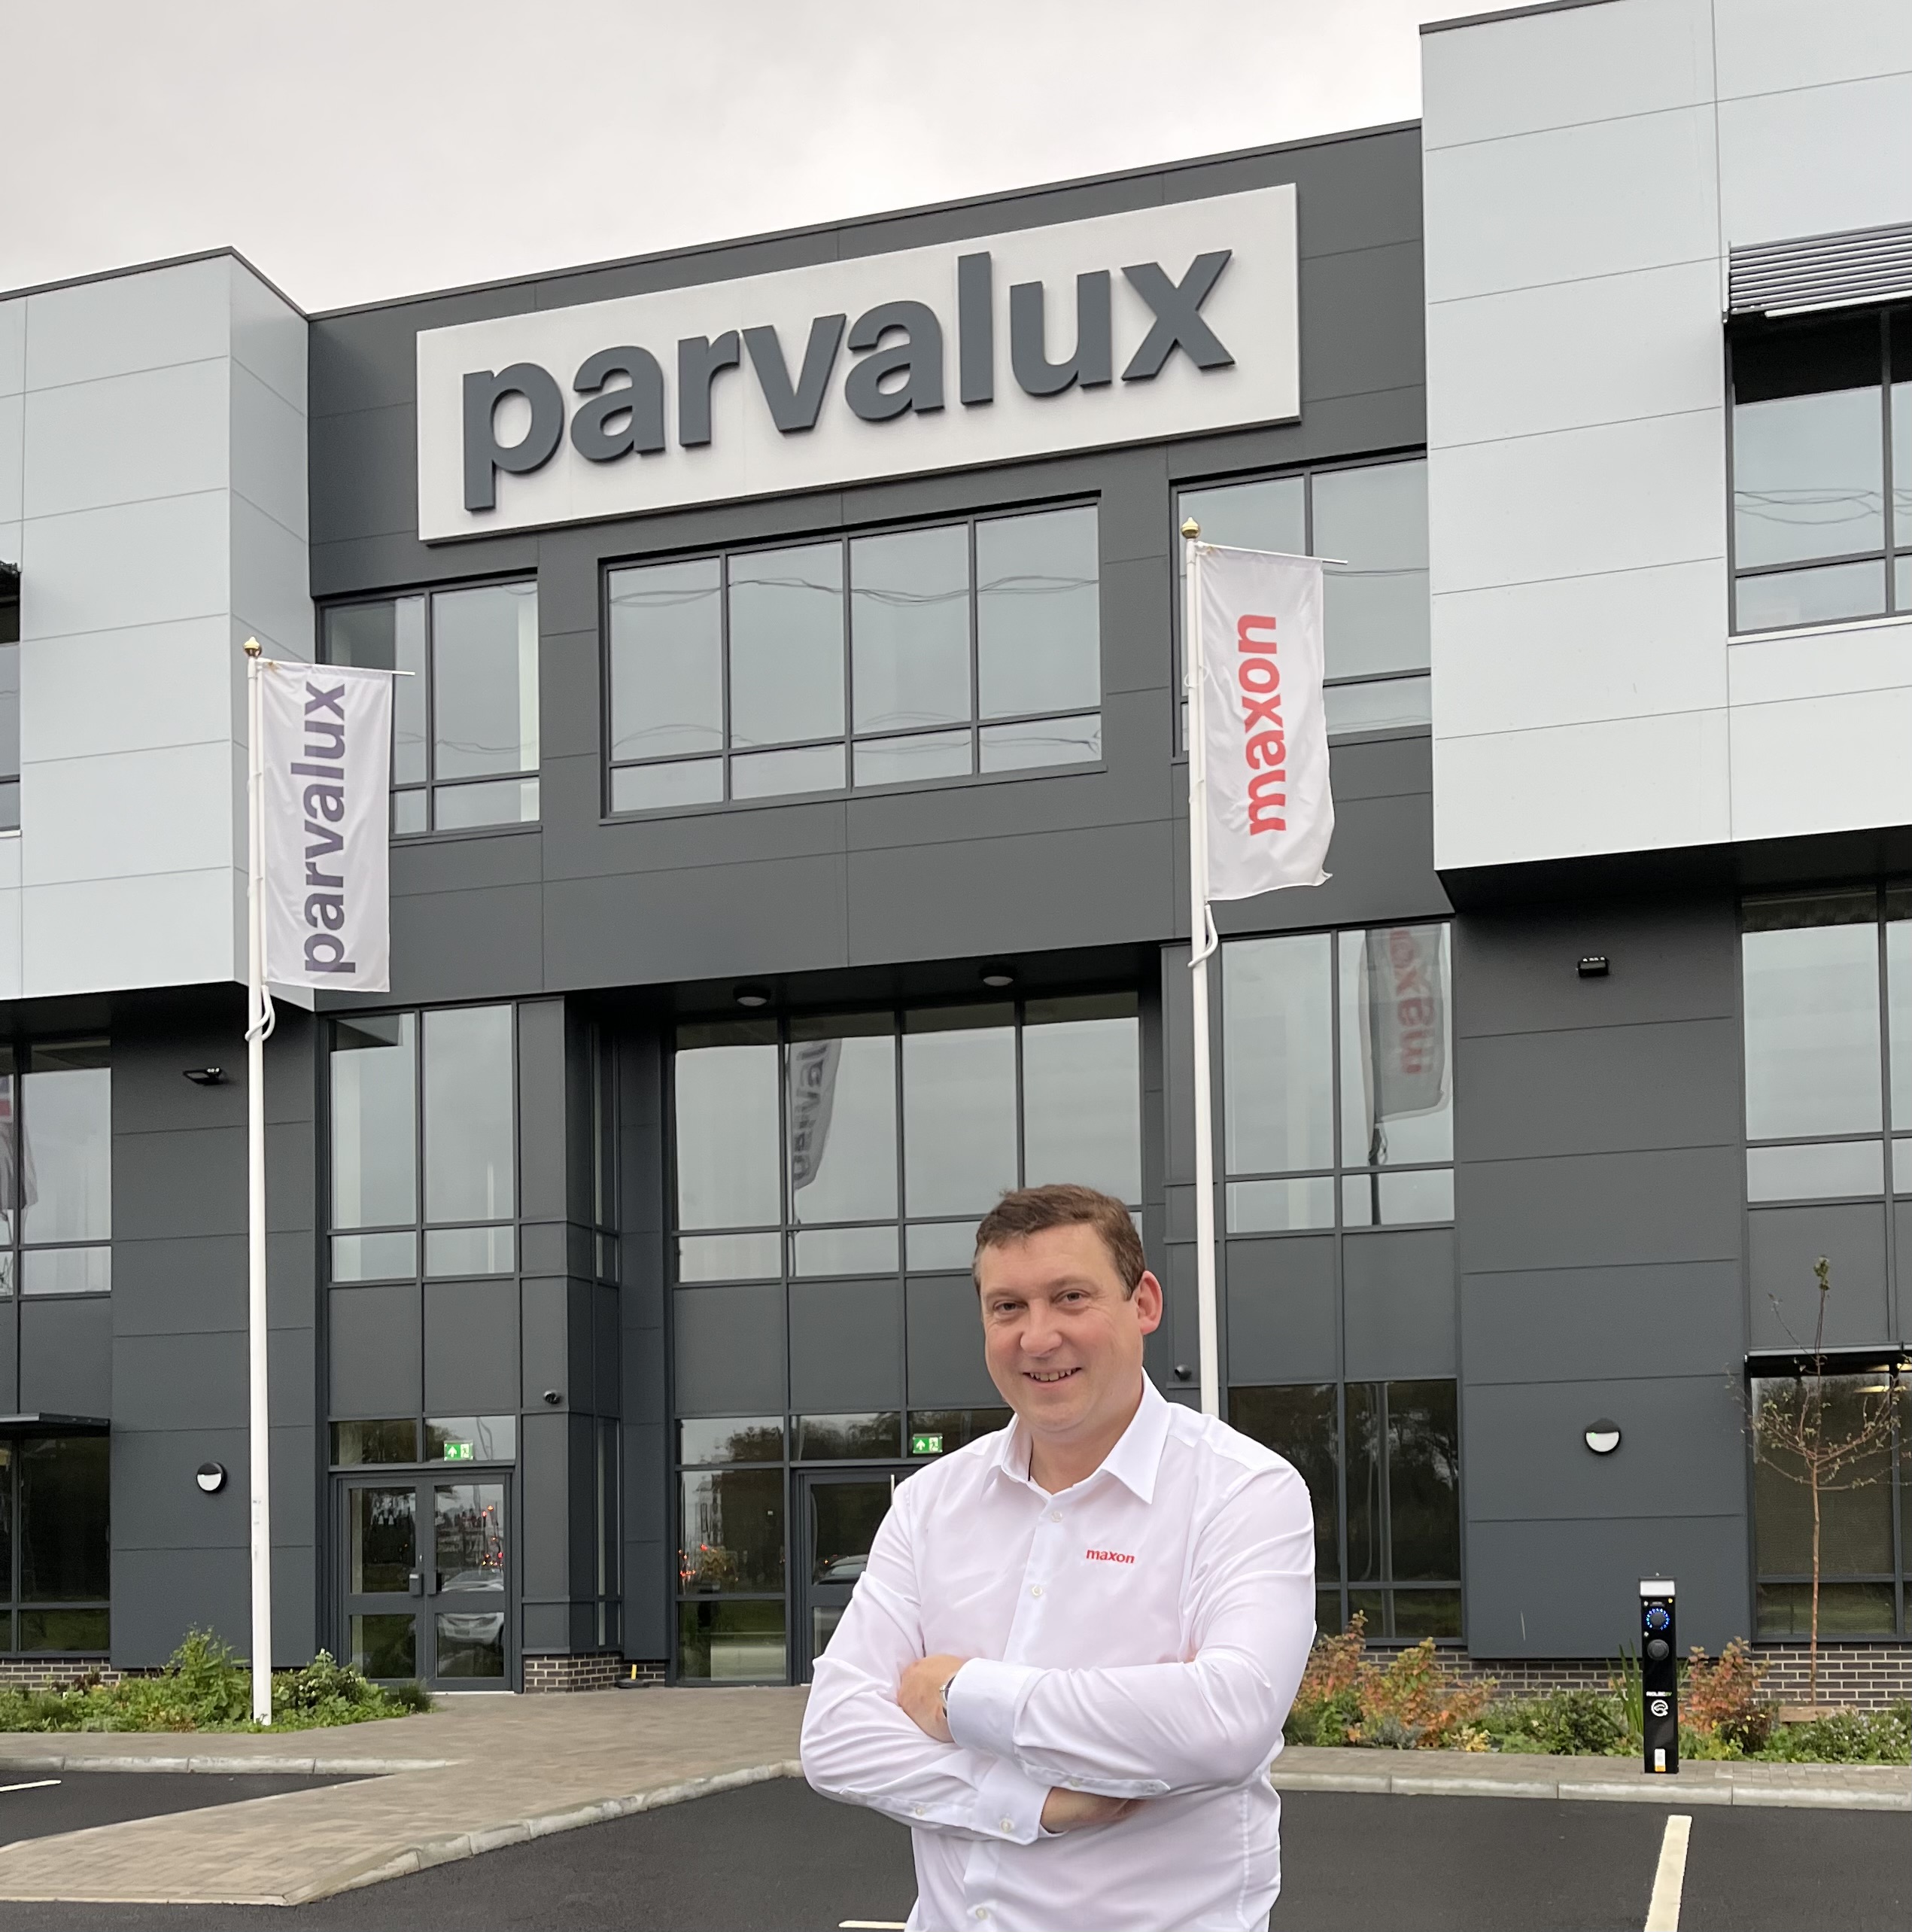 maxon, the manufacturer of motor and drive solutions, has recruited Ben Smith as the new UK Sales Manager for the Parvalux brand